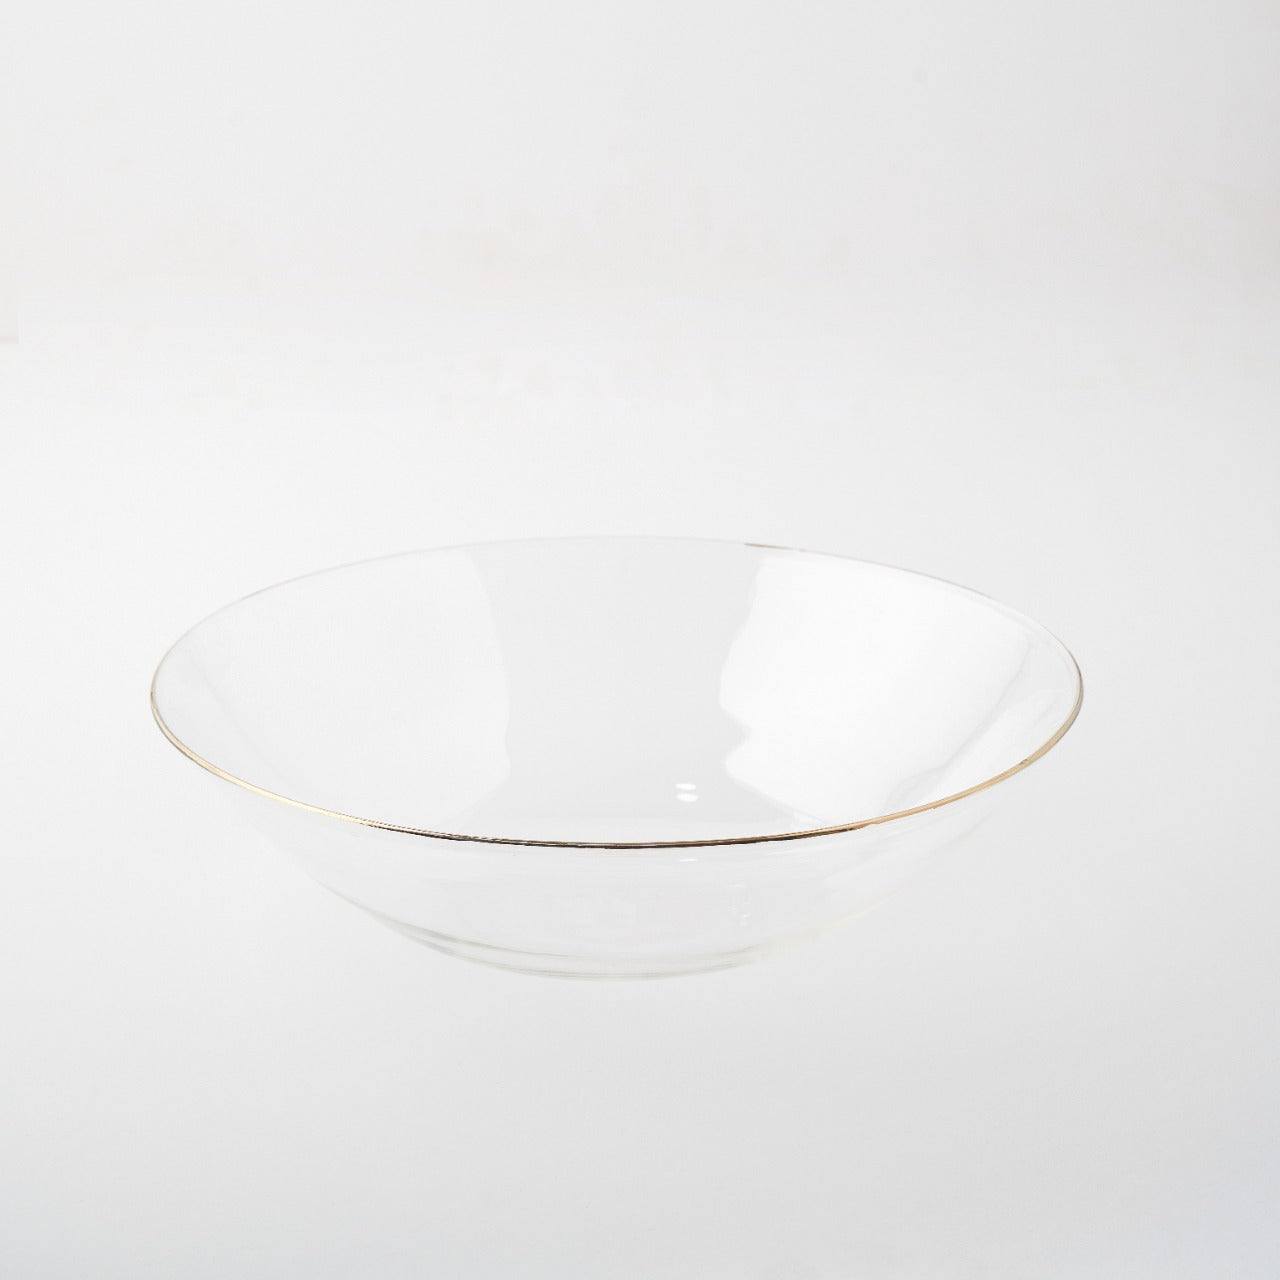 Rekama-Hand Blown Glass Bowls with Gold Edge